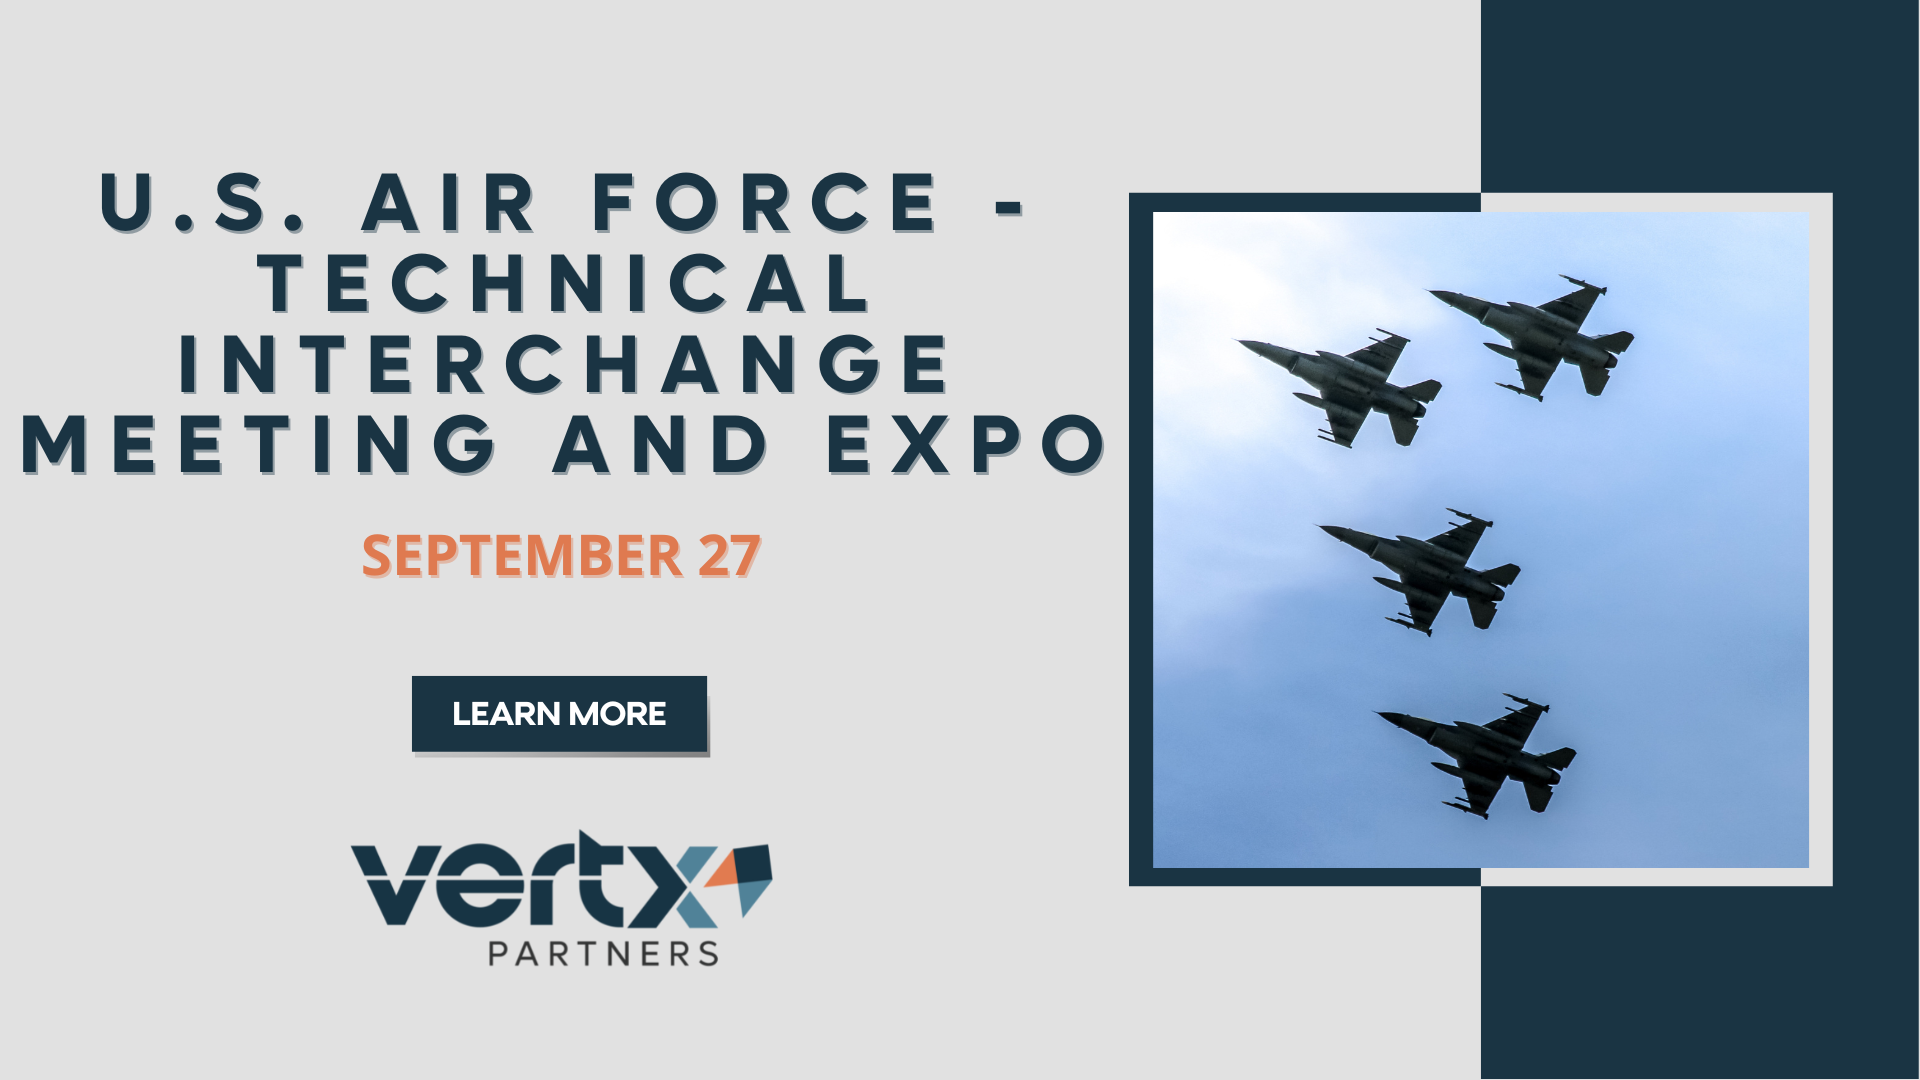 This graphic contains the title U.S. Air Force Technical Interchange Meeting and Expo with the date September 27th underneath and image to right of 4 fighter jets flying with a blue sky in the background